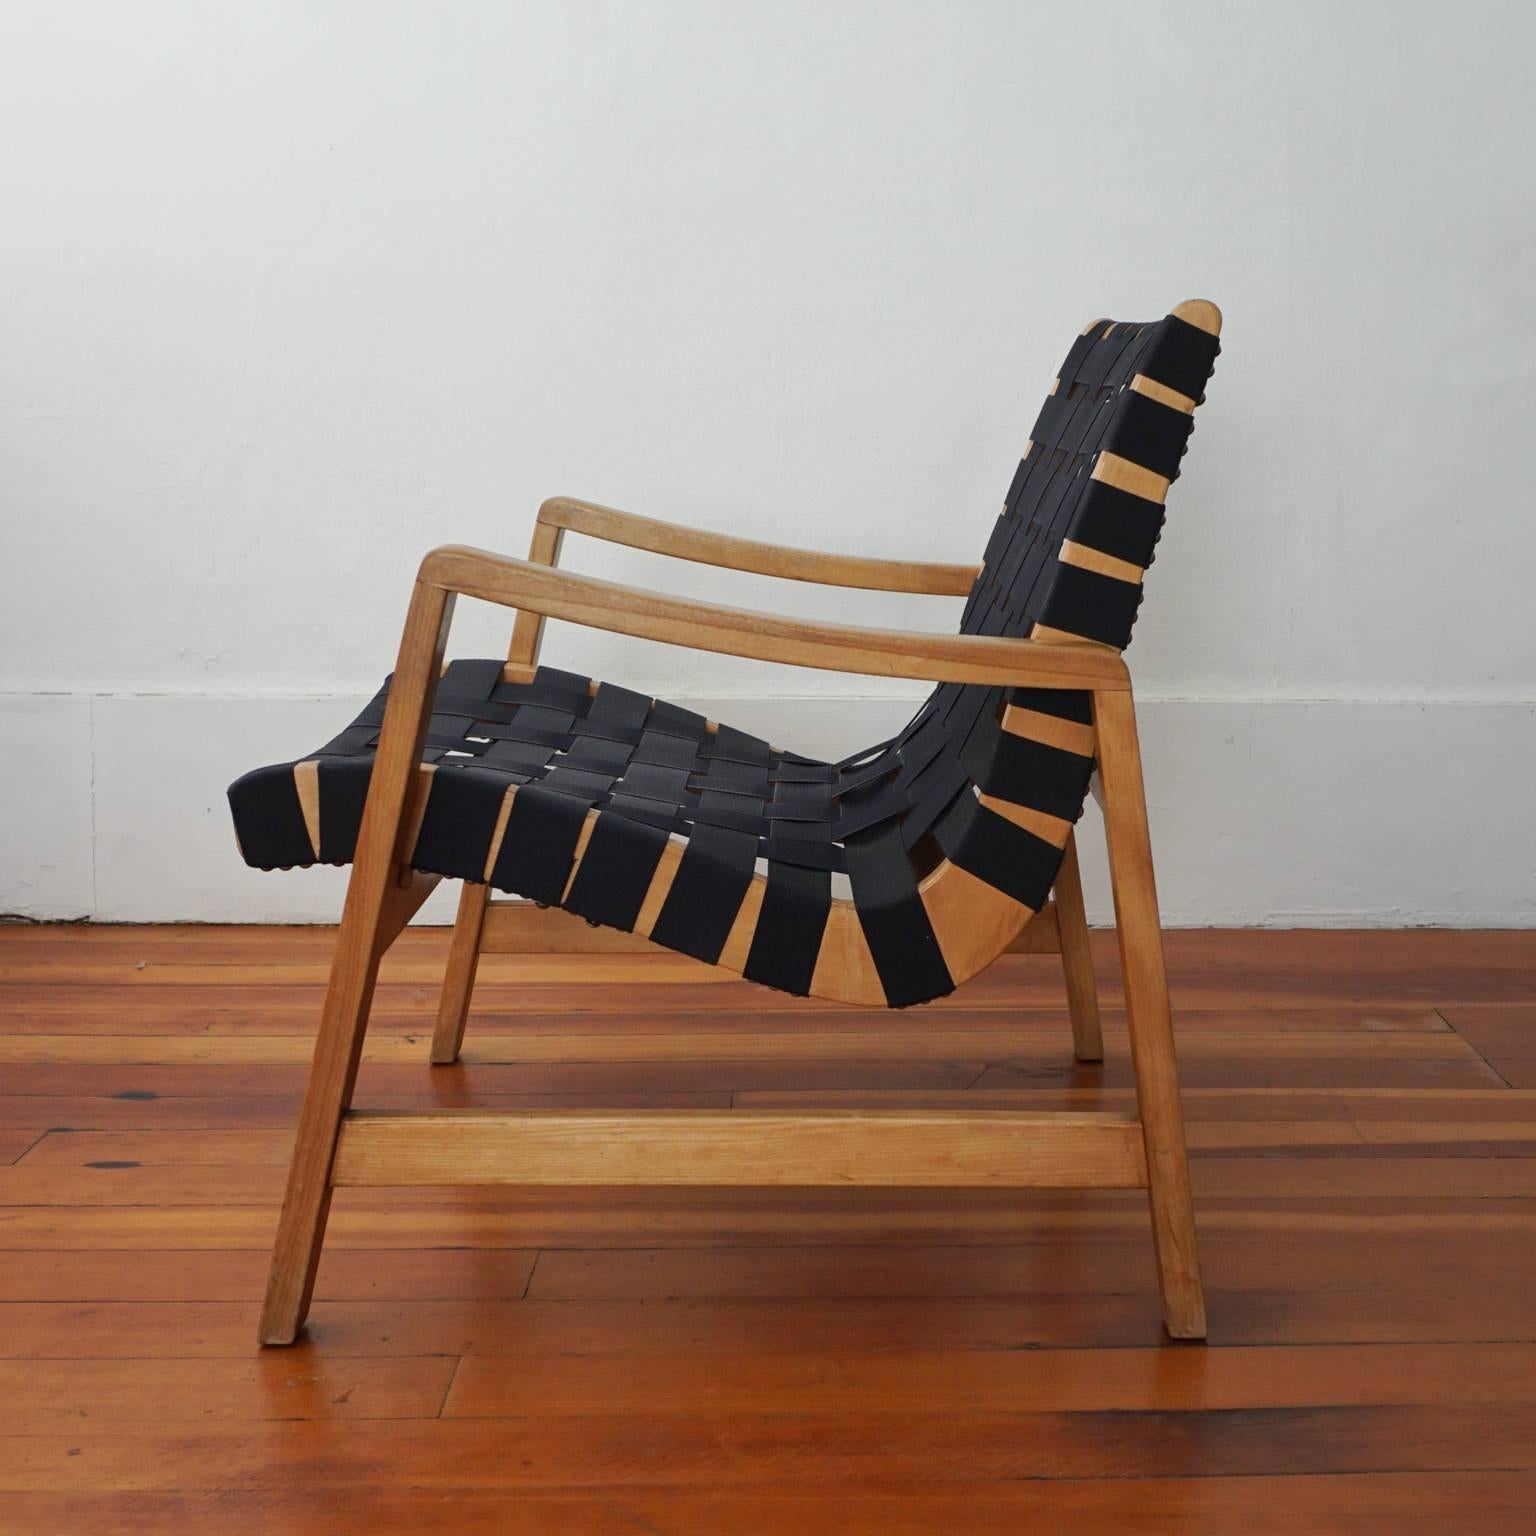 Knoll 652 webbed lounge chair deigned by Jens Risom for Knoll. Black cotton straps and maple frame. Early Knoll International label.
 